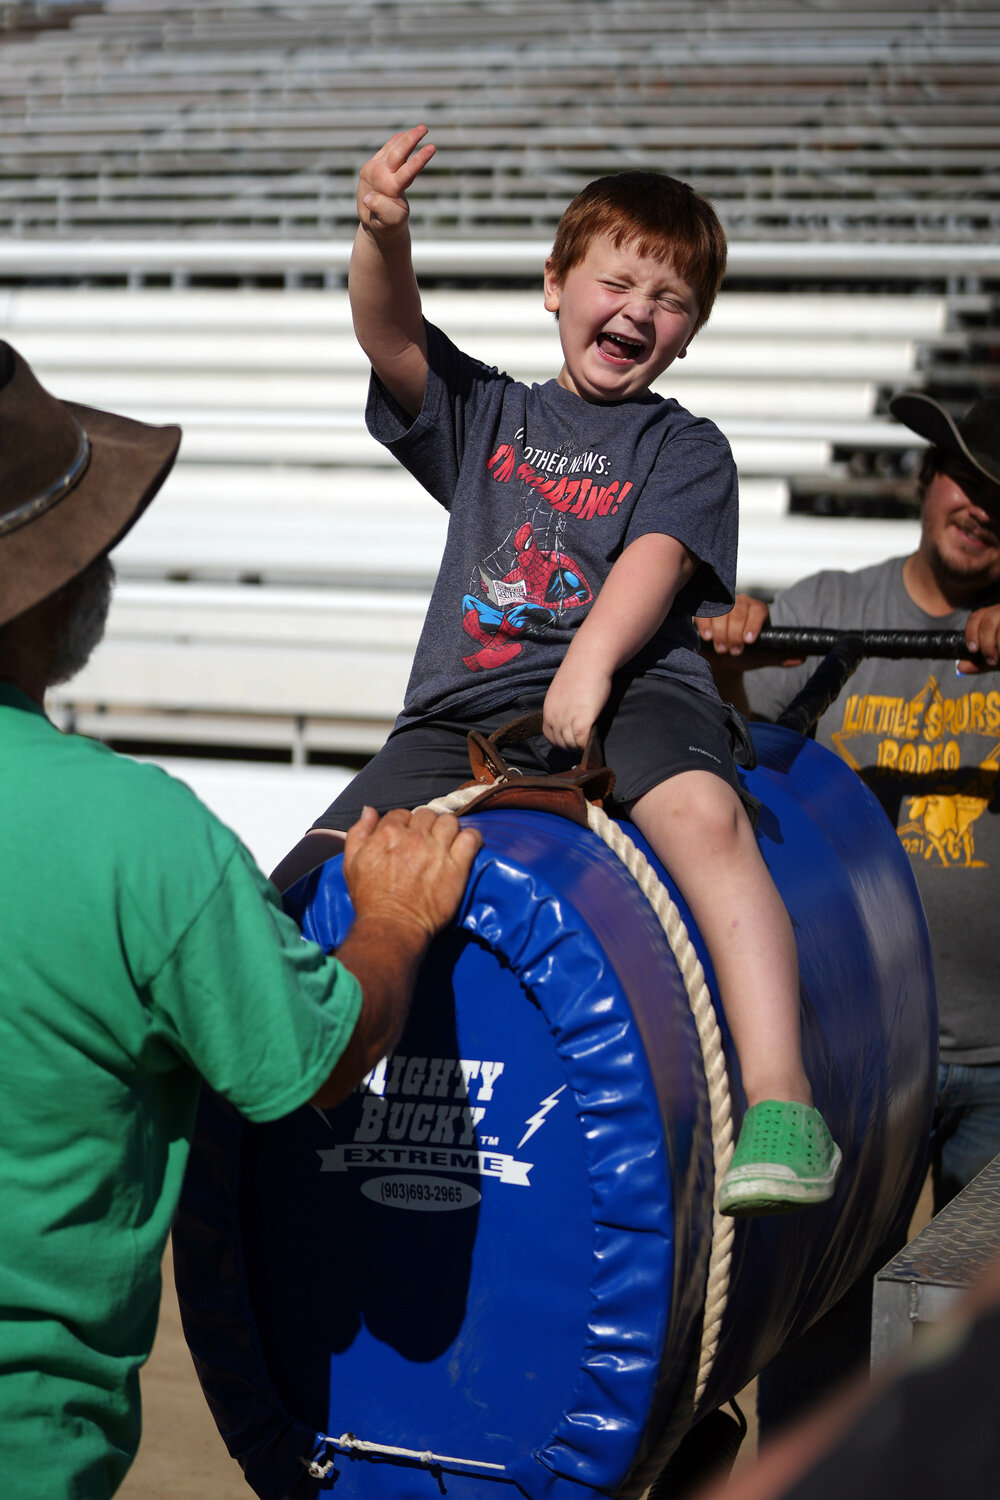 Benjamin Jeffries, 5, Fort Madison, rides the Mighty Bucky during the Special Kids Rodeo, open to all physically and mentally challenged kids and adults, Saturday, September 2 at the Tri-State Rodeo Grounds in Fort Madison. Events included simulated saddle bronc riding, horseback rides, simulated barrel racing, simulated calf roping, horse drawn trolley rides, KC the mechanical bull, goat tying, petting zoo, simulated bull riding and simulated horseback riding. Other pre-rodeo events include the Lil Spurs Rodeo Monday morning starting at 10 a.m. and Pee Wee Barrels in the horse arena behind the Tri-State Rodeo Arena Tuesday at 5:30 p.m.